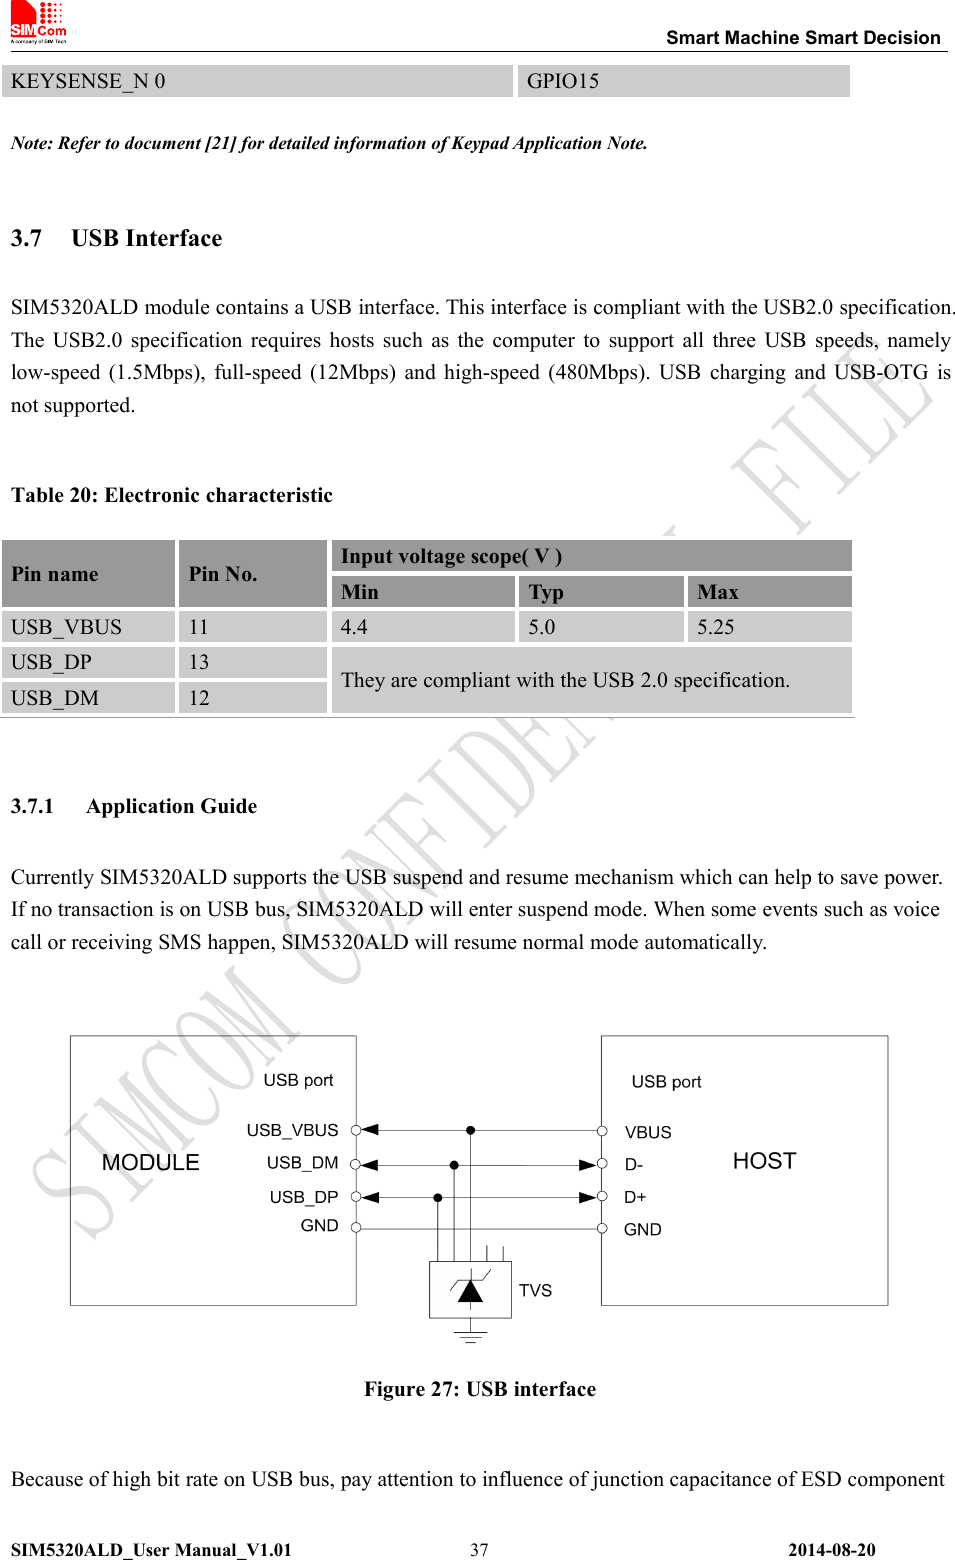 Smart Machine Smart DecisionSIM5320ALD_User Manual_V1.01 2014-08-2037KEYSENSE_N 0 GPIO15Note: Refer to document [21] for detailed information of Keypad Application Note.3.7 USB InterfaceSIM5320ALD module contains a USB interface. This interface is compliant with the USB2.0 specification.The USB2.0 specification requires hosts such as the computer to support all three USB speeds, namelylow-speed (1.5Mbps), full-speed (12Mbps) and high-speed (480Mbps). USB charging and USB-OTG isnot supported.Table 20: Electronic characteristicPin namePin No.Input voltage scope( V )MinTypMaxUSB_VBUS114.45.05.25USB_DP13They are compliant with the USB 2.0 specification.USB_DM123.7.1 Application GuideCurrently SIM5320ALD supports the USB suspend and resume mechanism which can help to save power.If no transaction is on USB bus, SIM5320ALD will enter suspend mode. When some events such as voicecall or receiving SMS happen, SIM5320ALD will resume normal mode automatically.Figure 27: USB interfaceBecause of high bit rate on USB bus, pay attention to influence of junction capacitance of ESD component